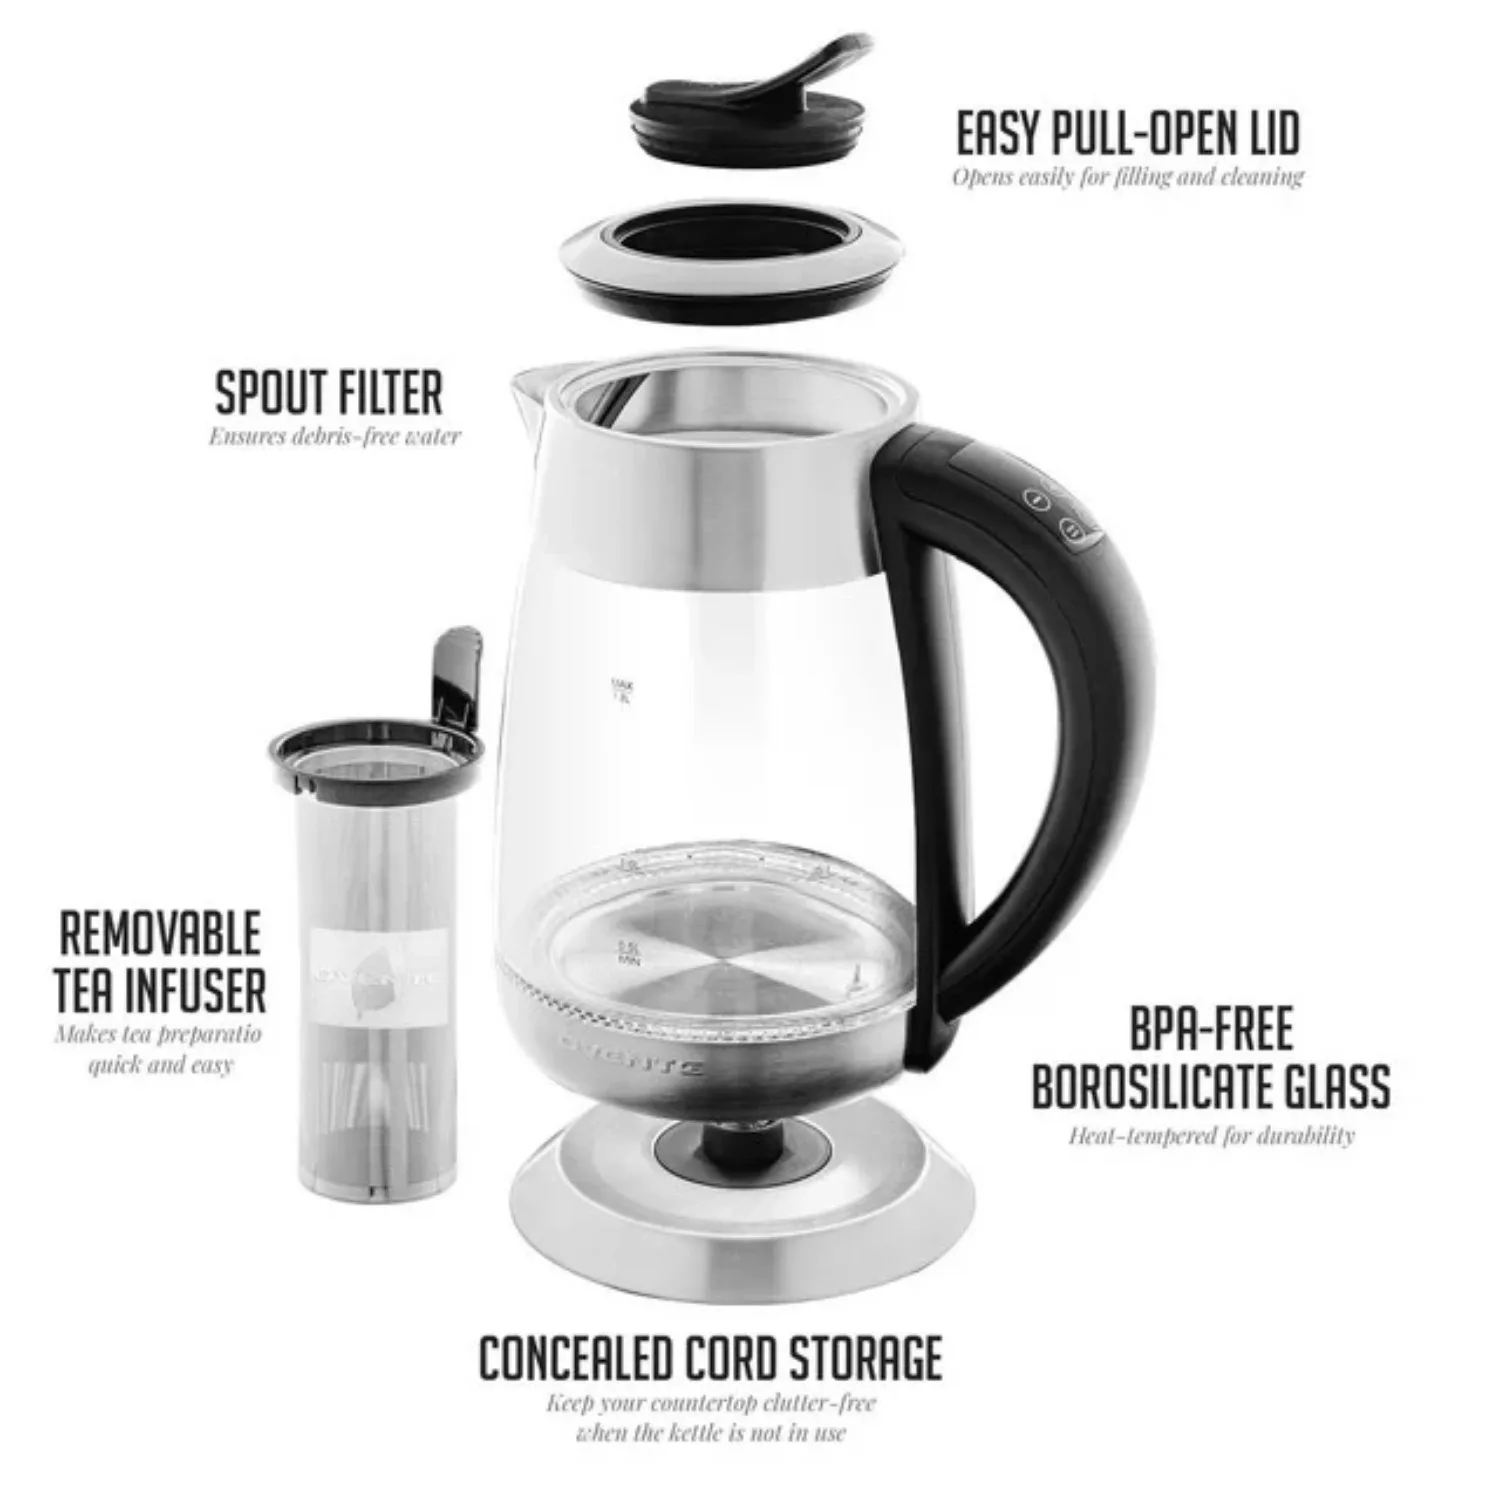 https://ae01.alicdn.com/kf/Se2cd44cb01844b749491c866f4bb2e98M/Electric-glass-teapot-1-8L-cordless-1500W-instant-hot-water-boiler-heater-stainless-steel-self-closing.jpg